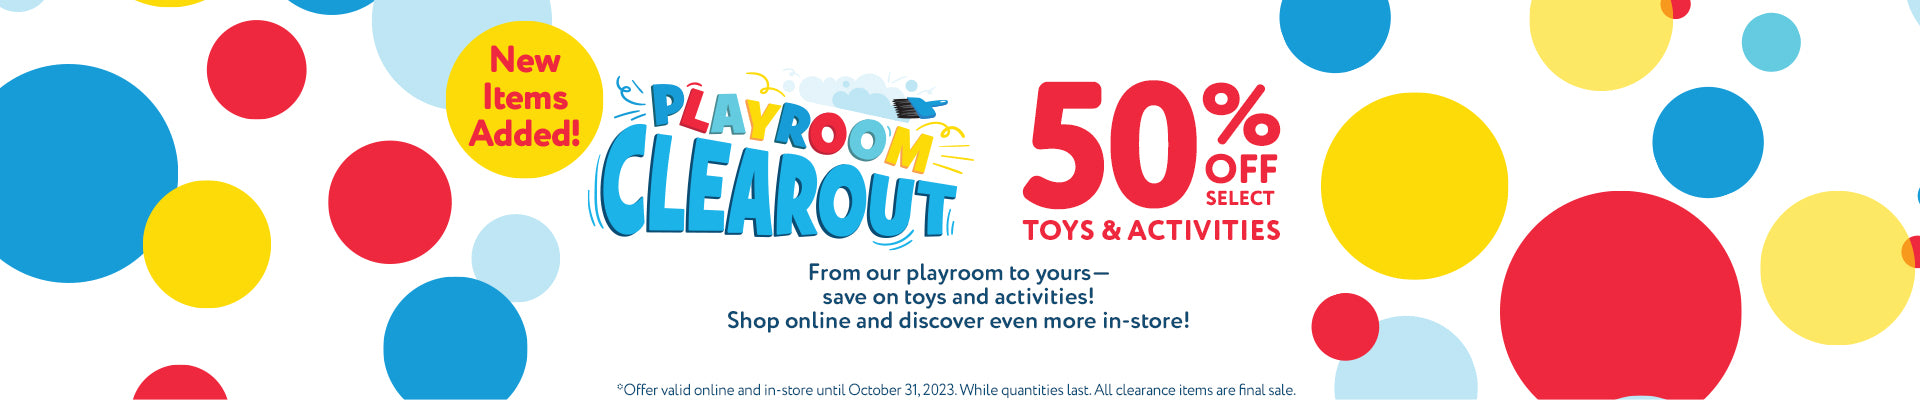 Playroom Clearout 50% Off Toys & Activities.  New items added!  From our playroom to yours—save on toys and activities! Shop online and discover even more in-store!  Offer valid online and in-store until October 31, 2023. While quantities last. All clearance items are final sale.